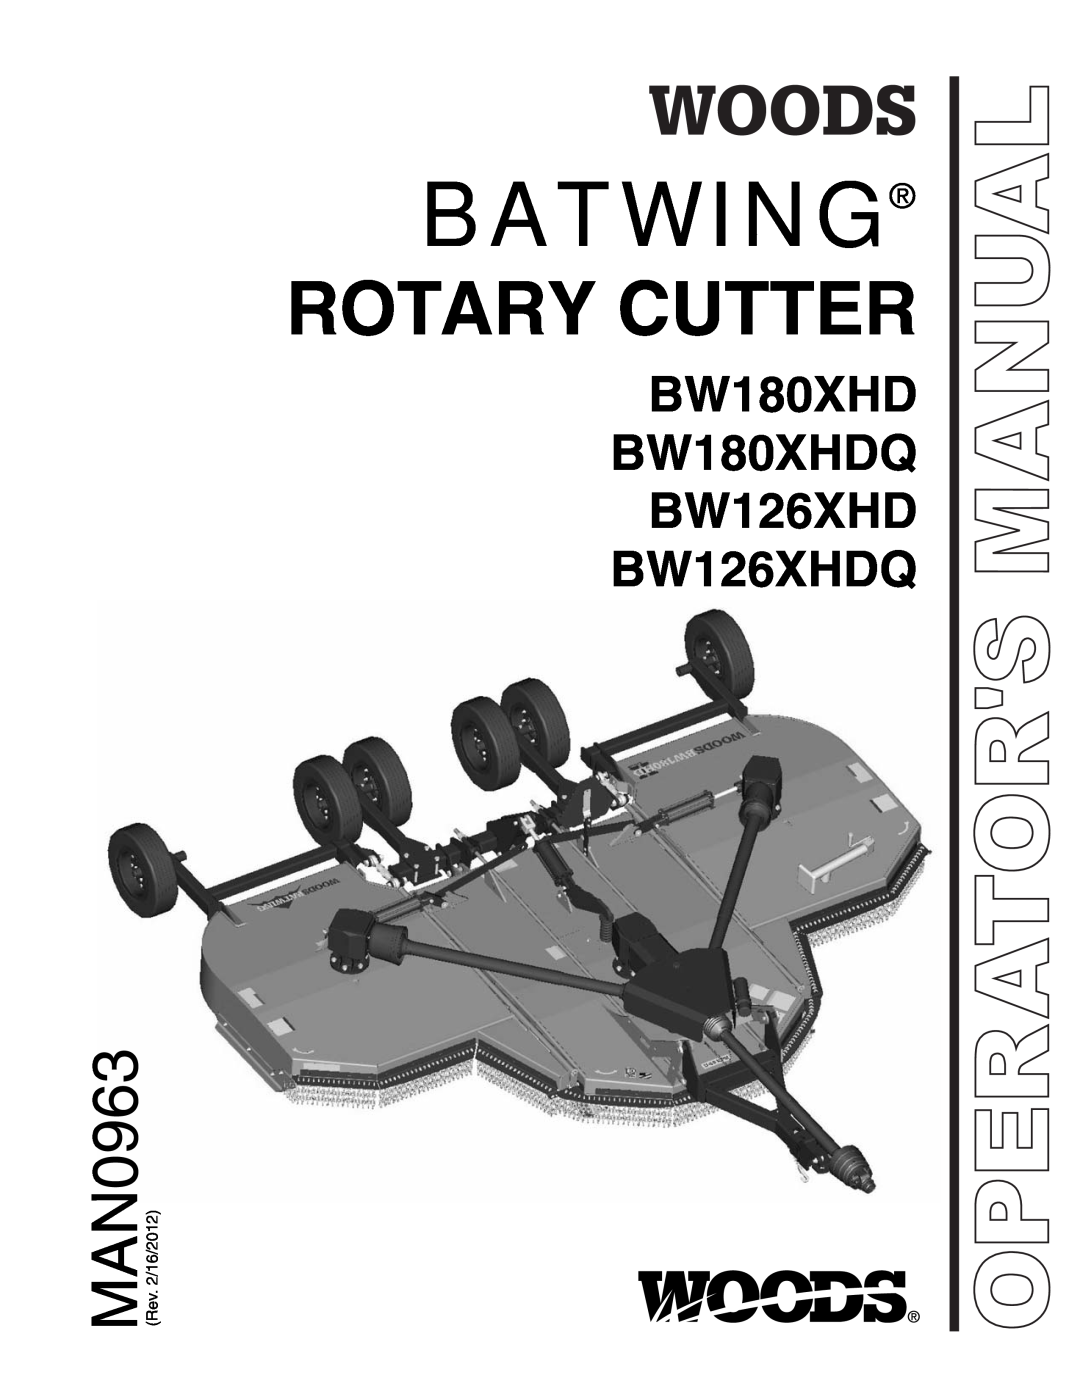 Woods Equipment manual Batwing, Rotary Cutter, BW180XHD BW180XHDQ BW126XHD BW126XHDQ, Operators Manual 